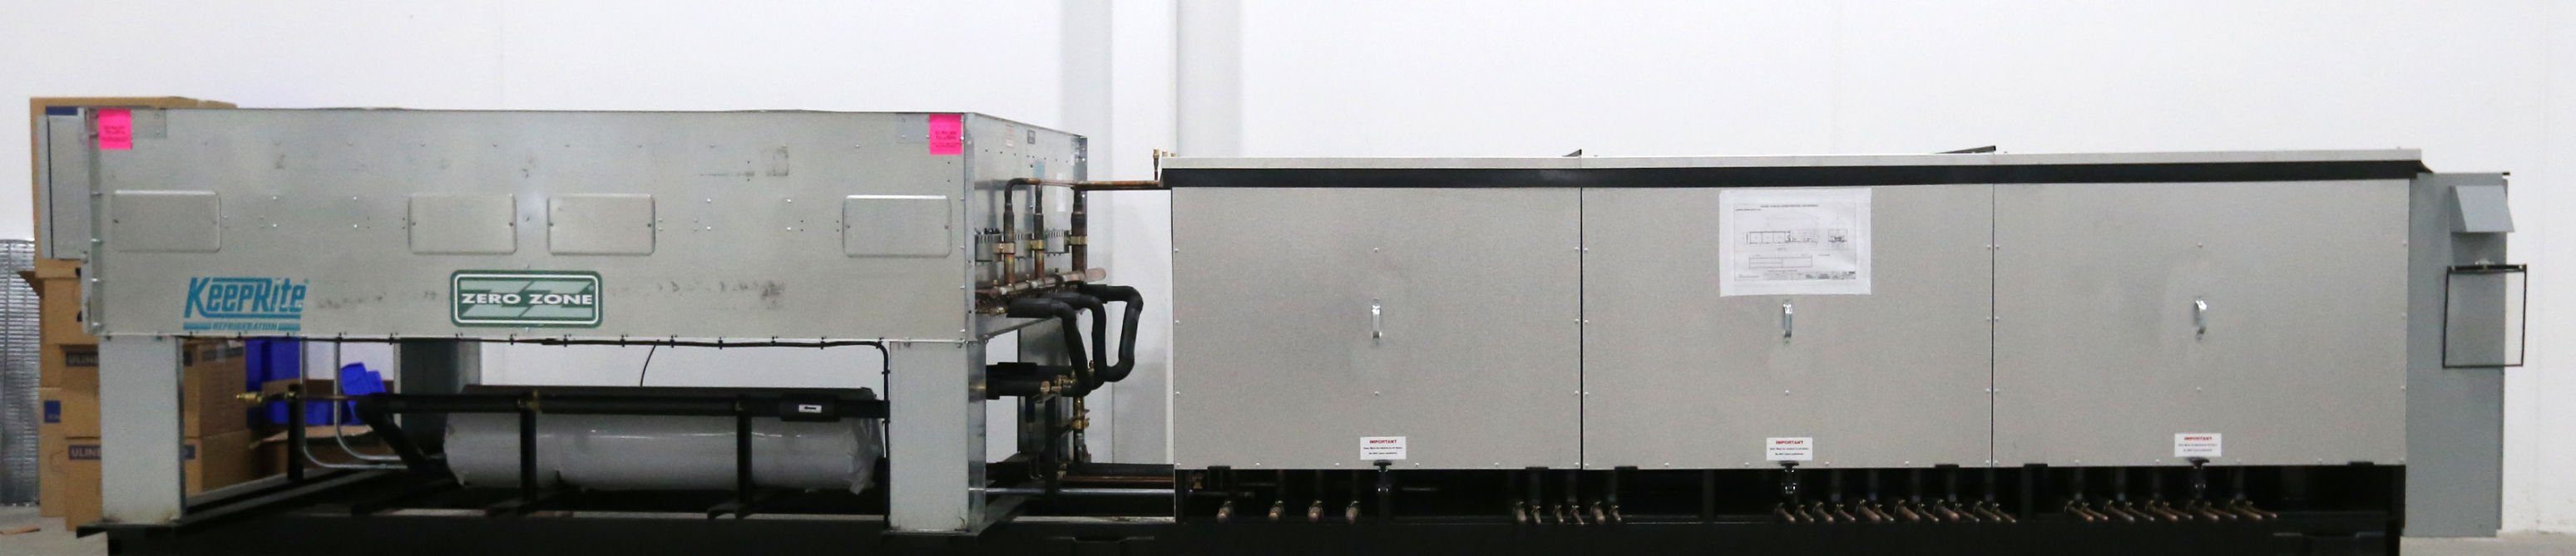 An industrial refrigeration unit at Zero Zone in Dyersville, Iowa, on Thursday, May 5, 2022.    PHOTO CREDIT: JESSICA REILLY